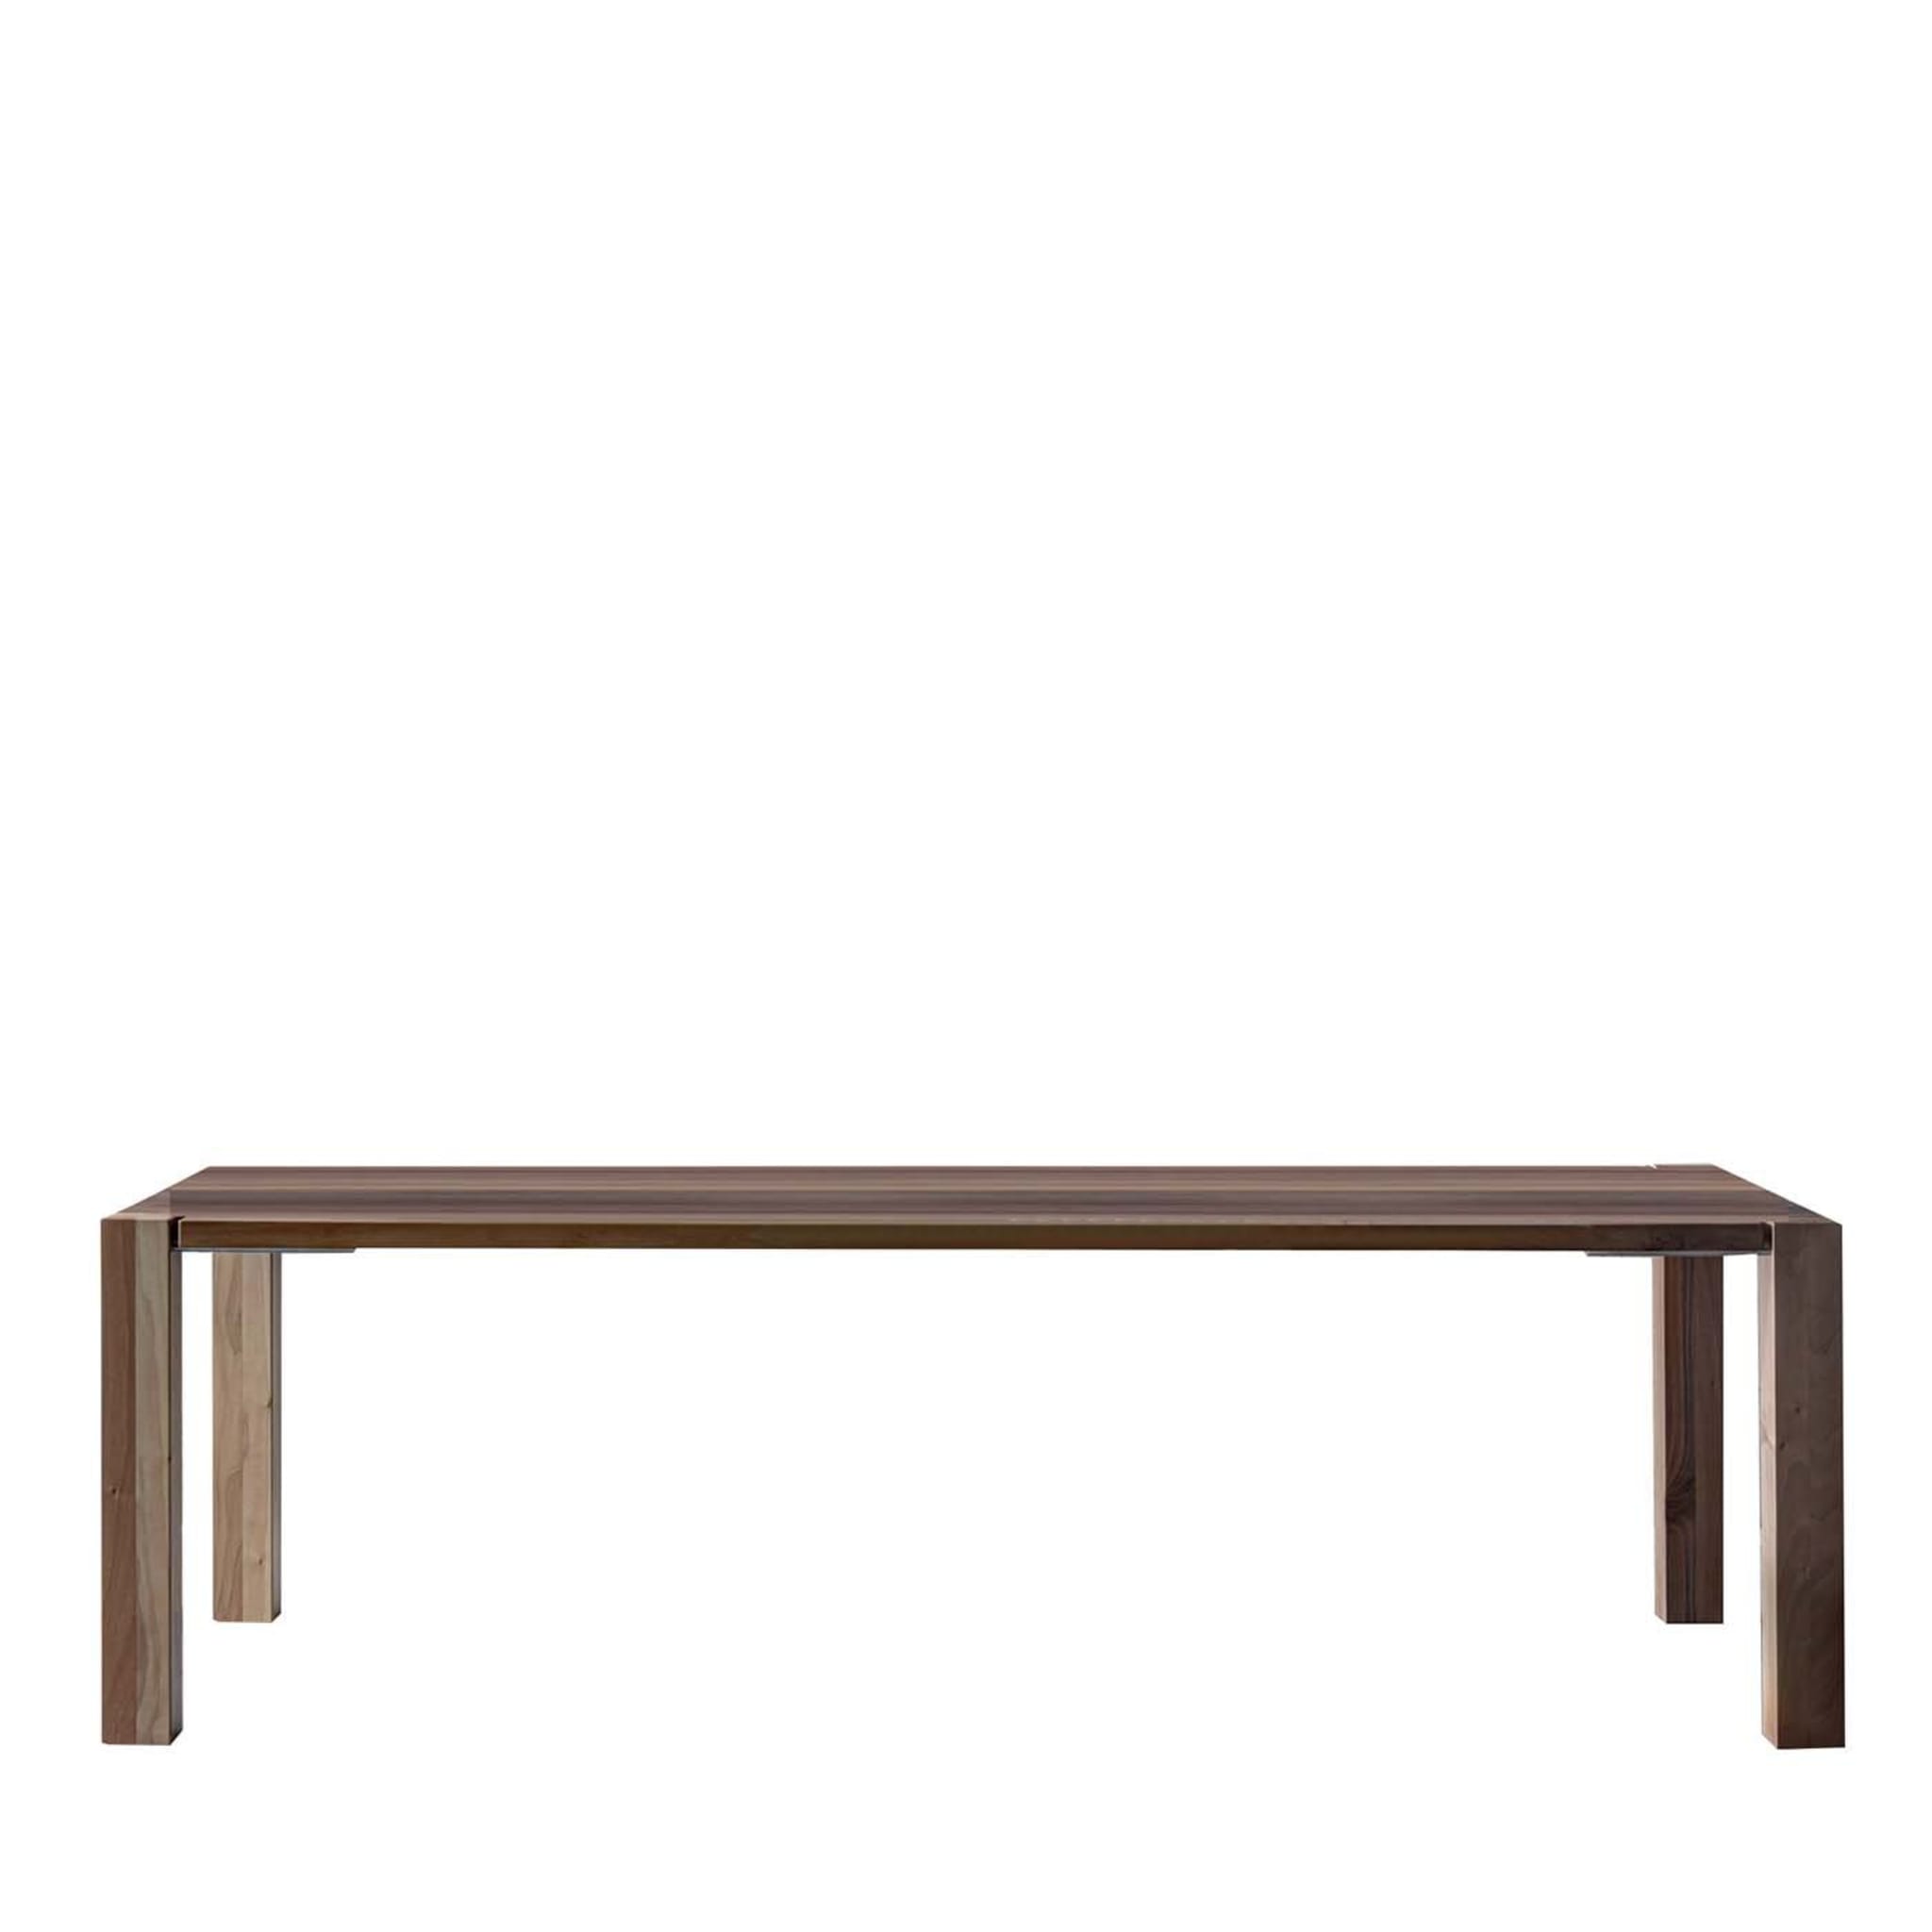 Wf1 Chestnut Table - Main view